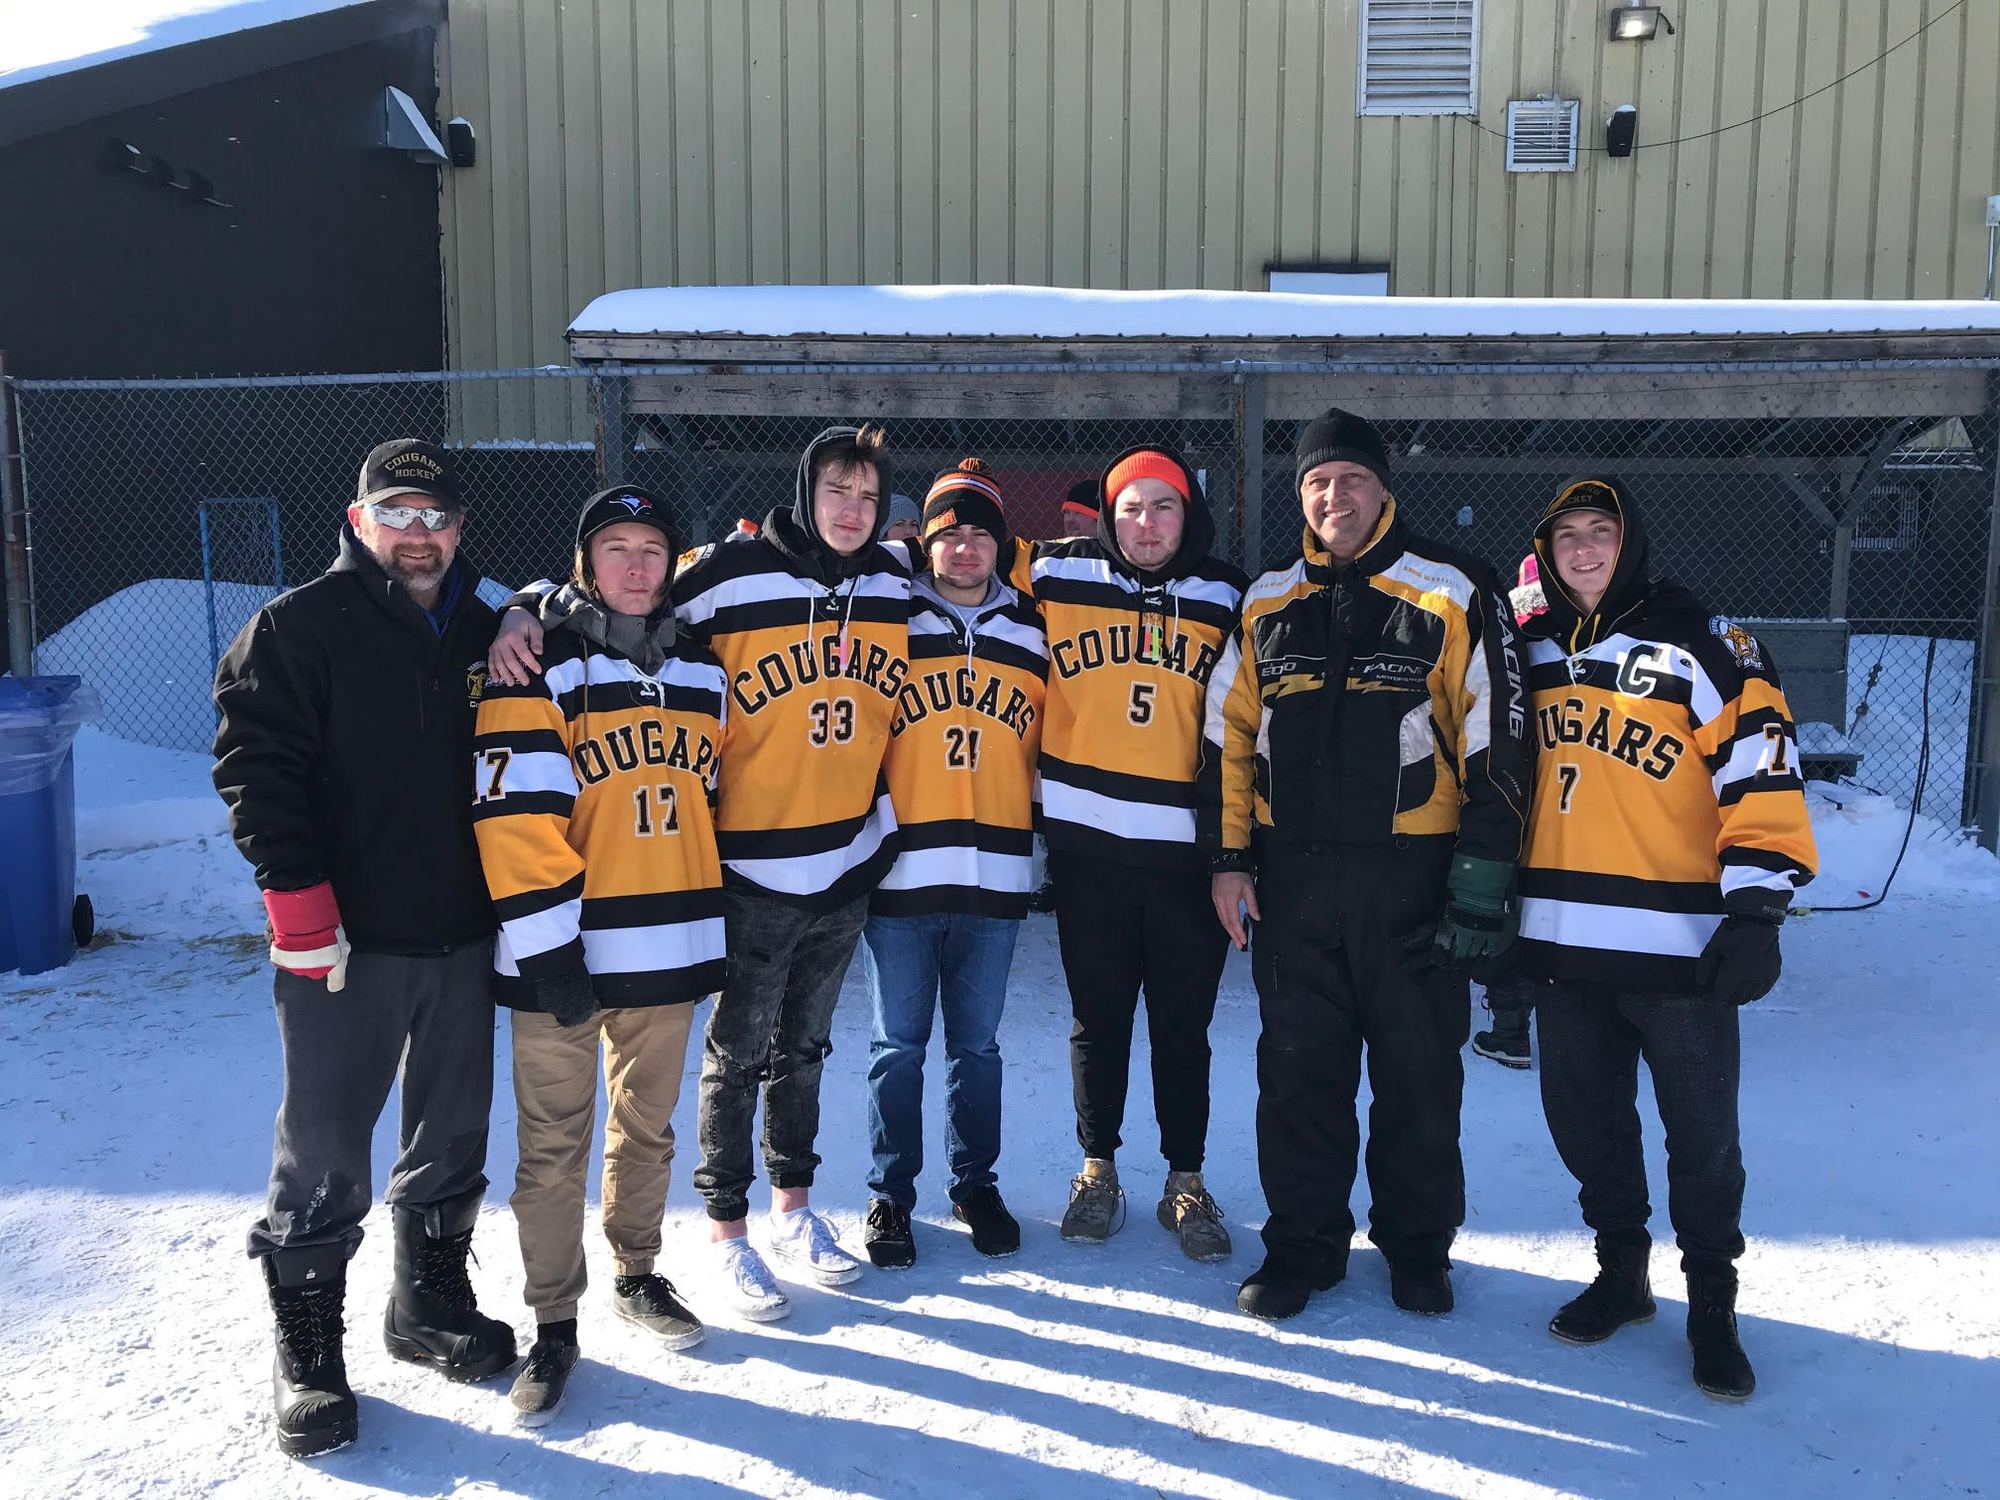 Big win for Vankleek Hill Cougars in South Grenville after a fun day at Champlain Winter Carnival